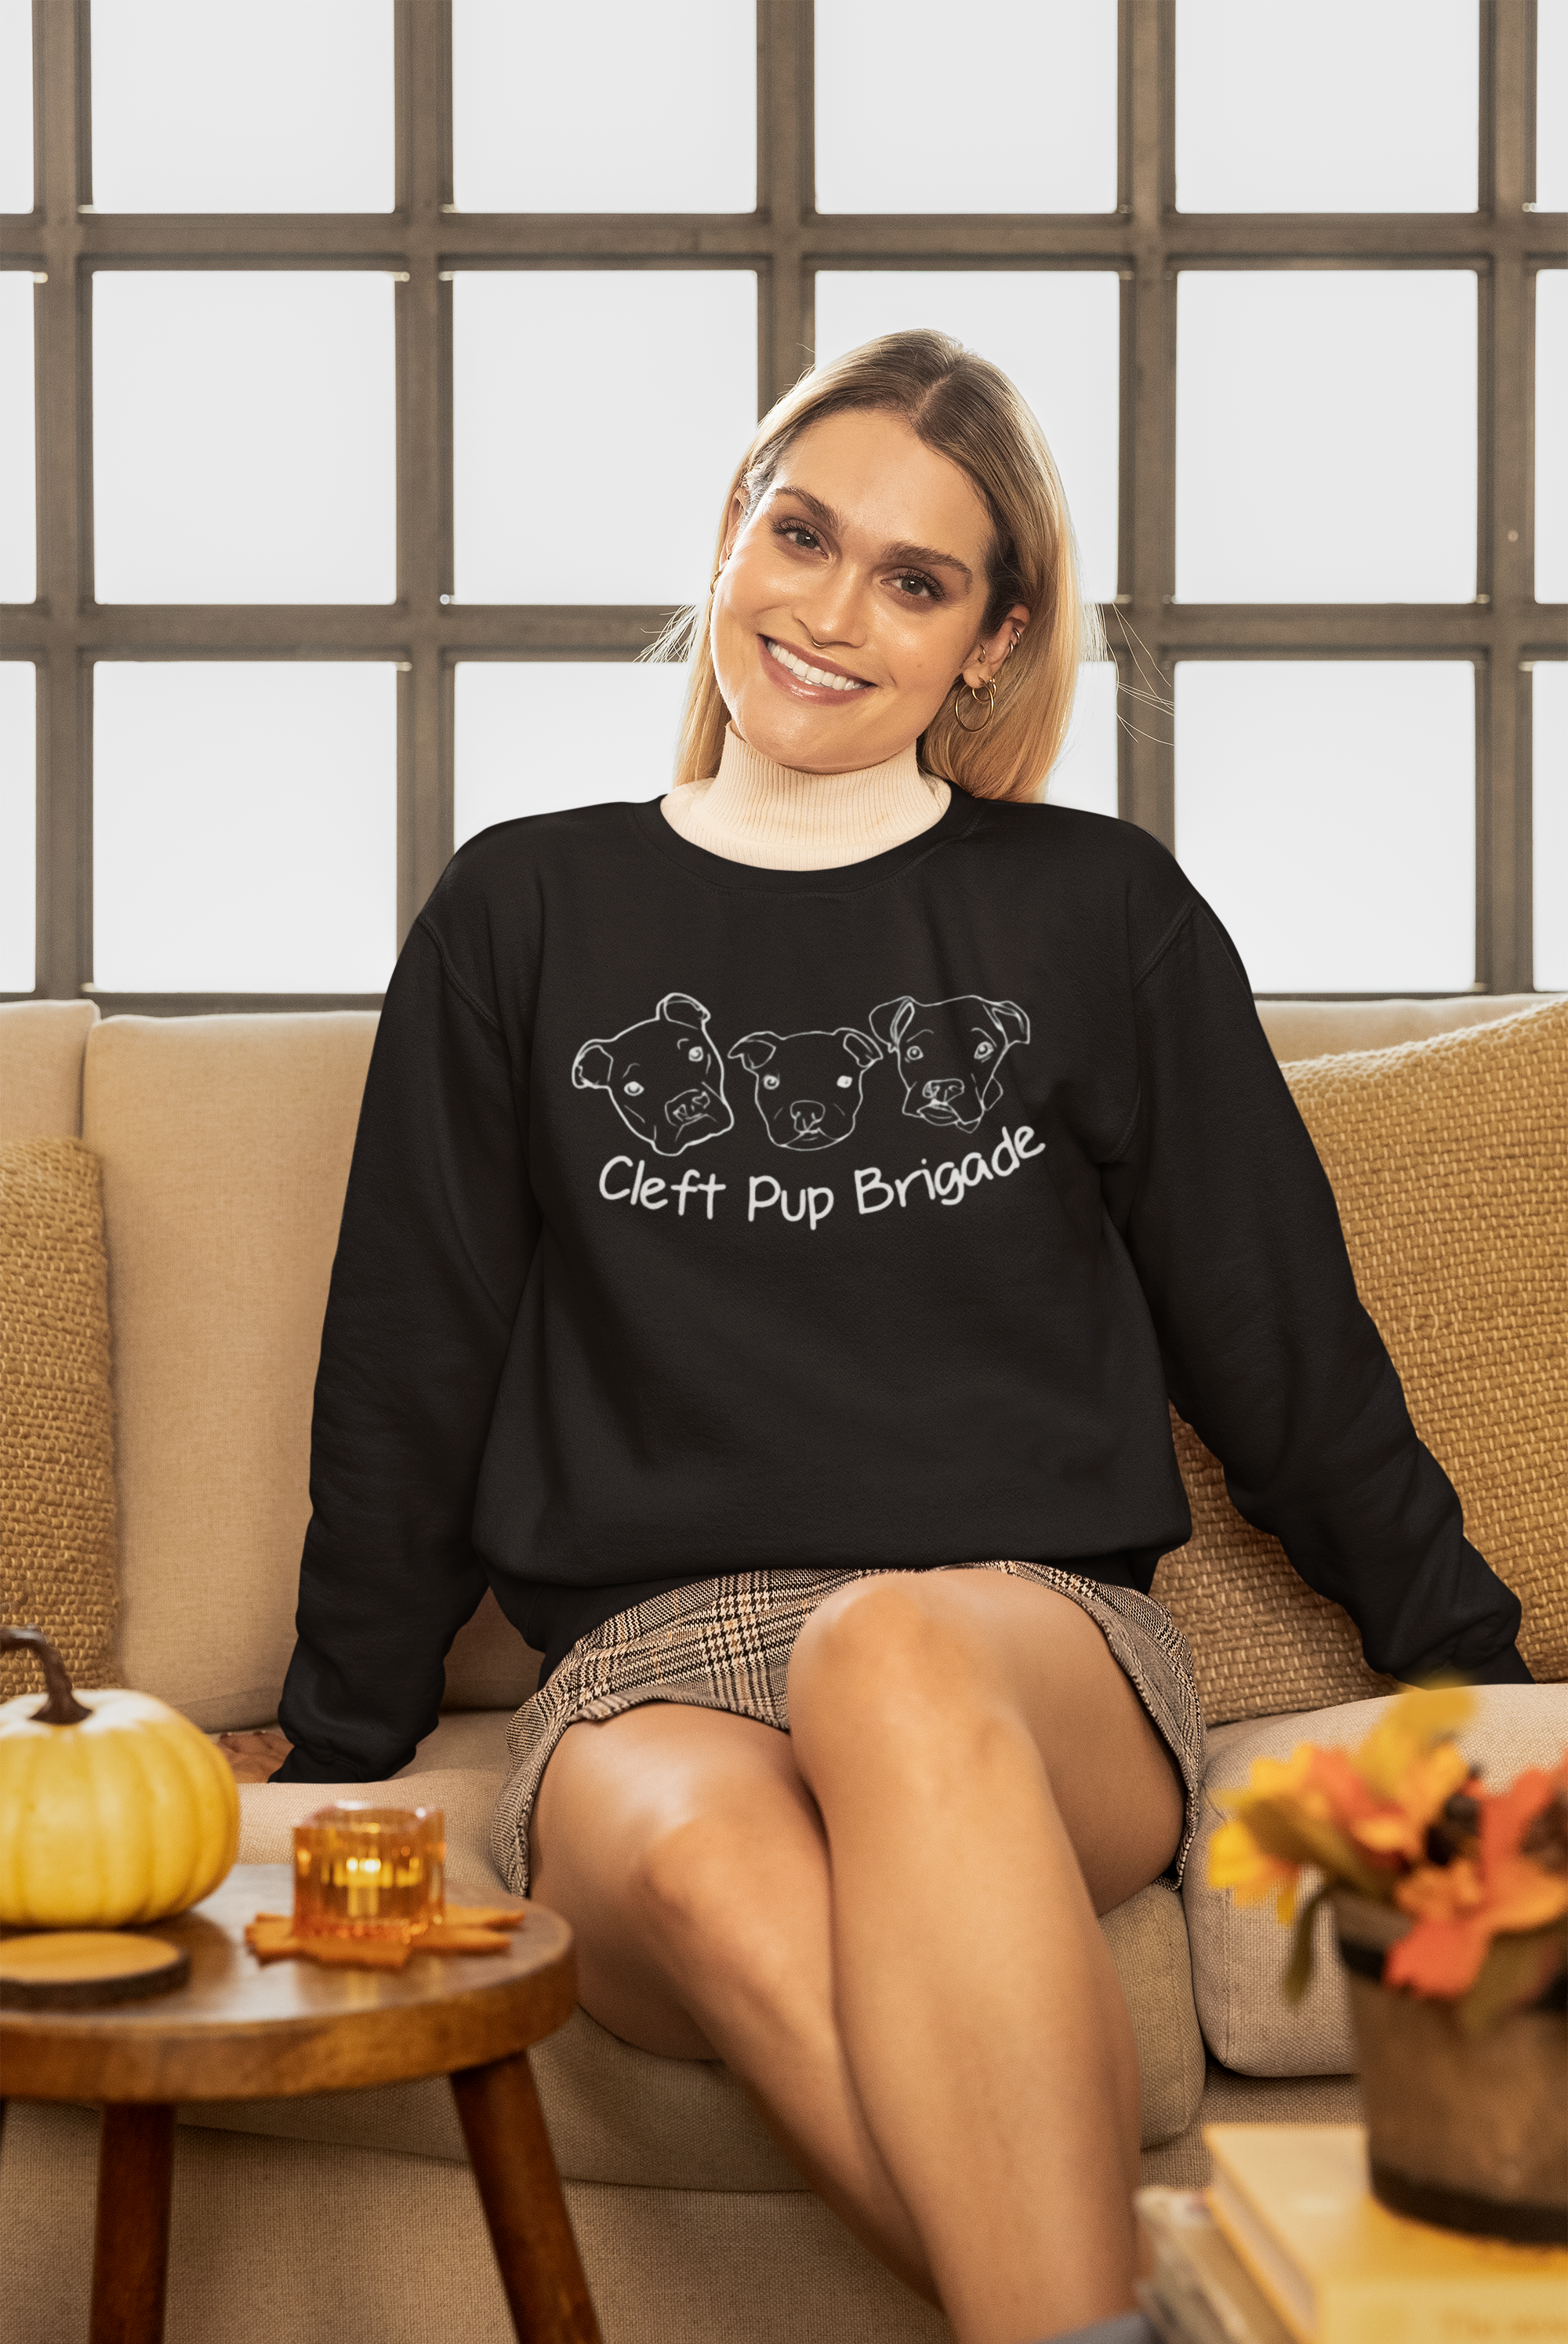 Cleft Pup Brigade B&W Logo Sweatshirt (available in several colors)